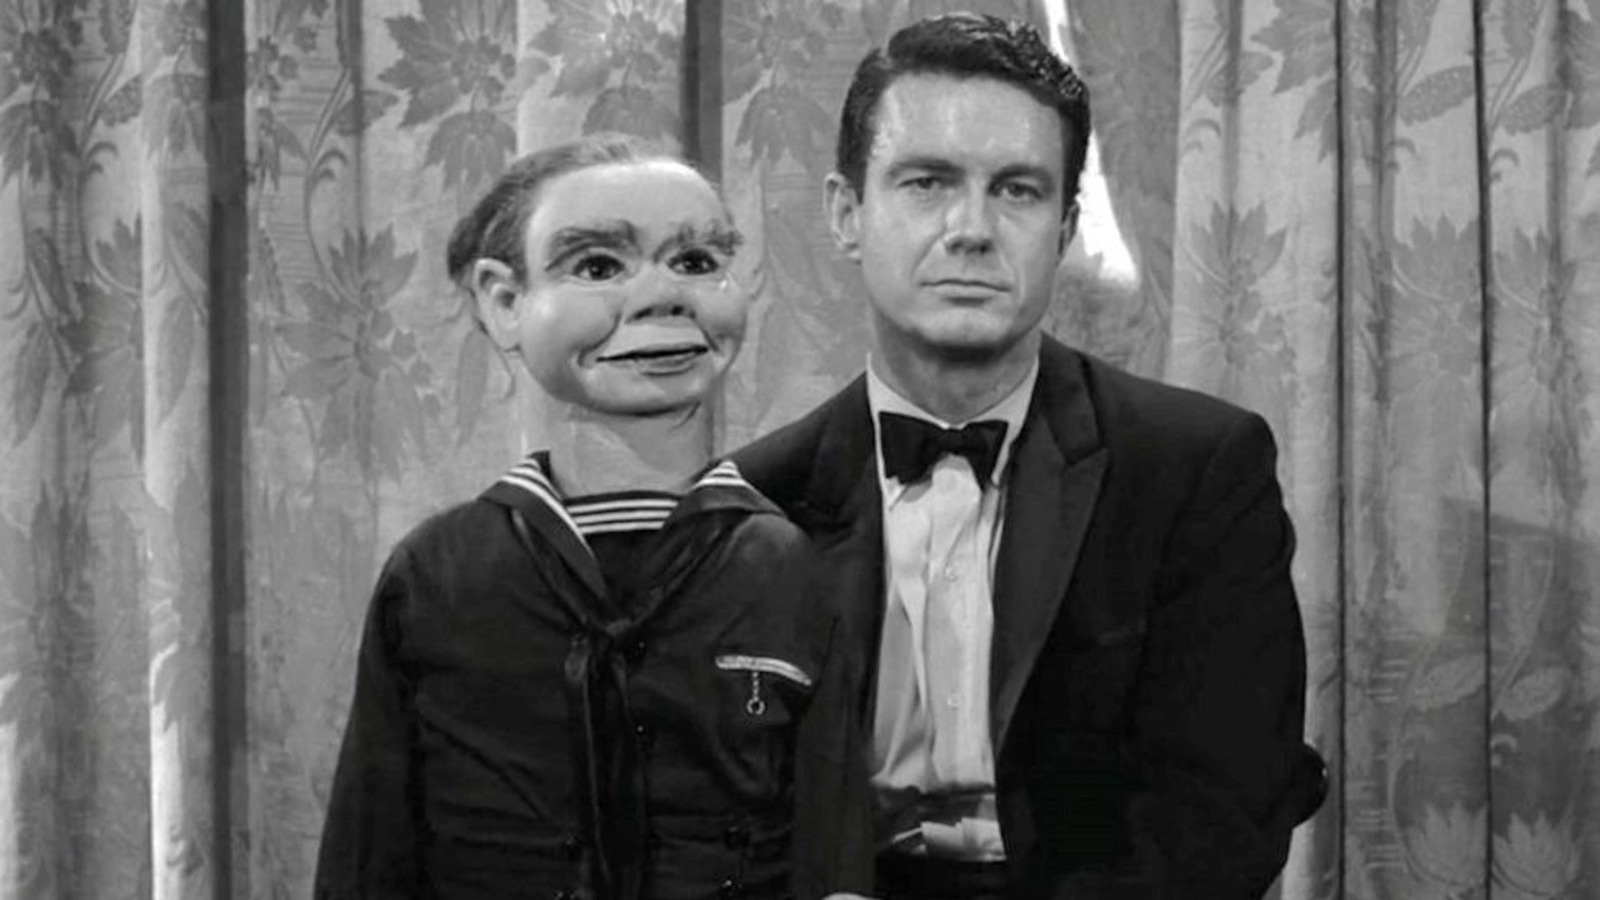 The Twilight Zone Needed A Favor From A Disney Great To Make The Dummy Work